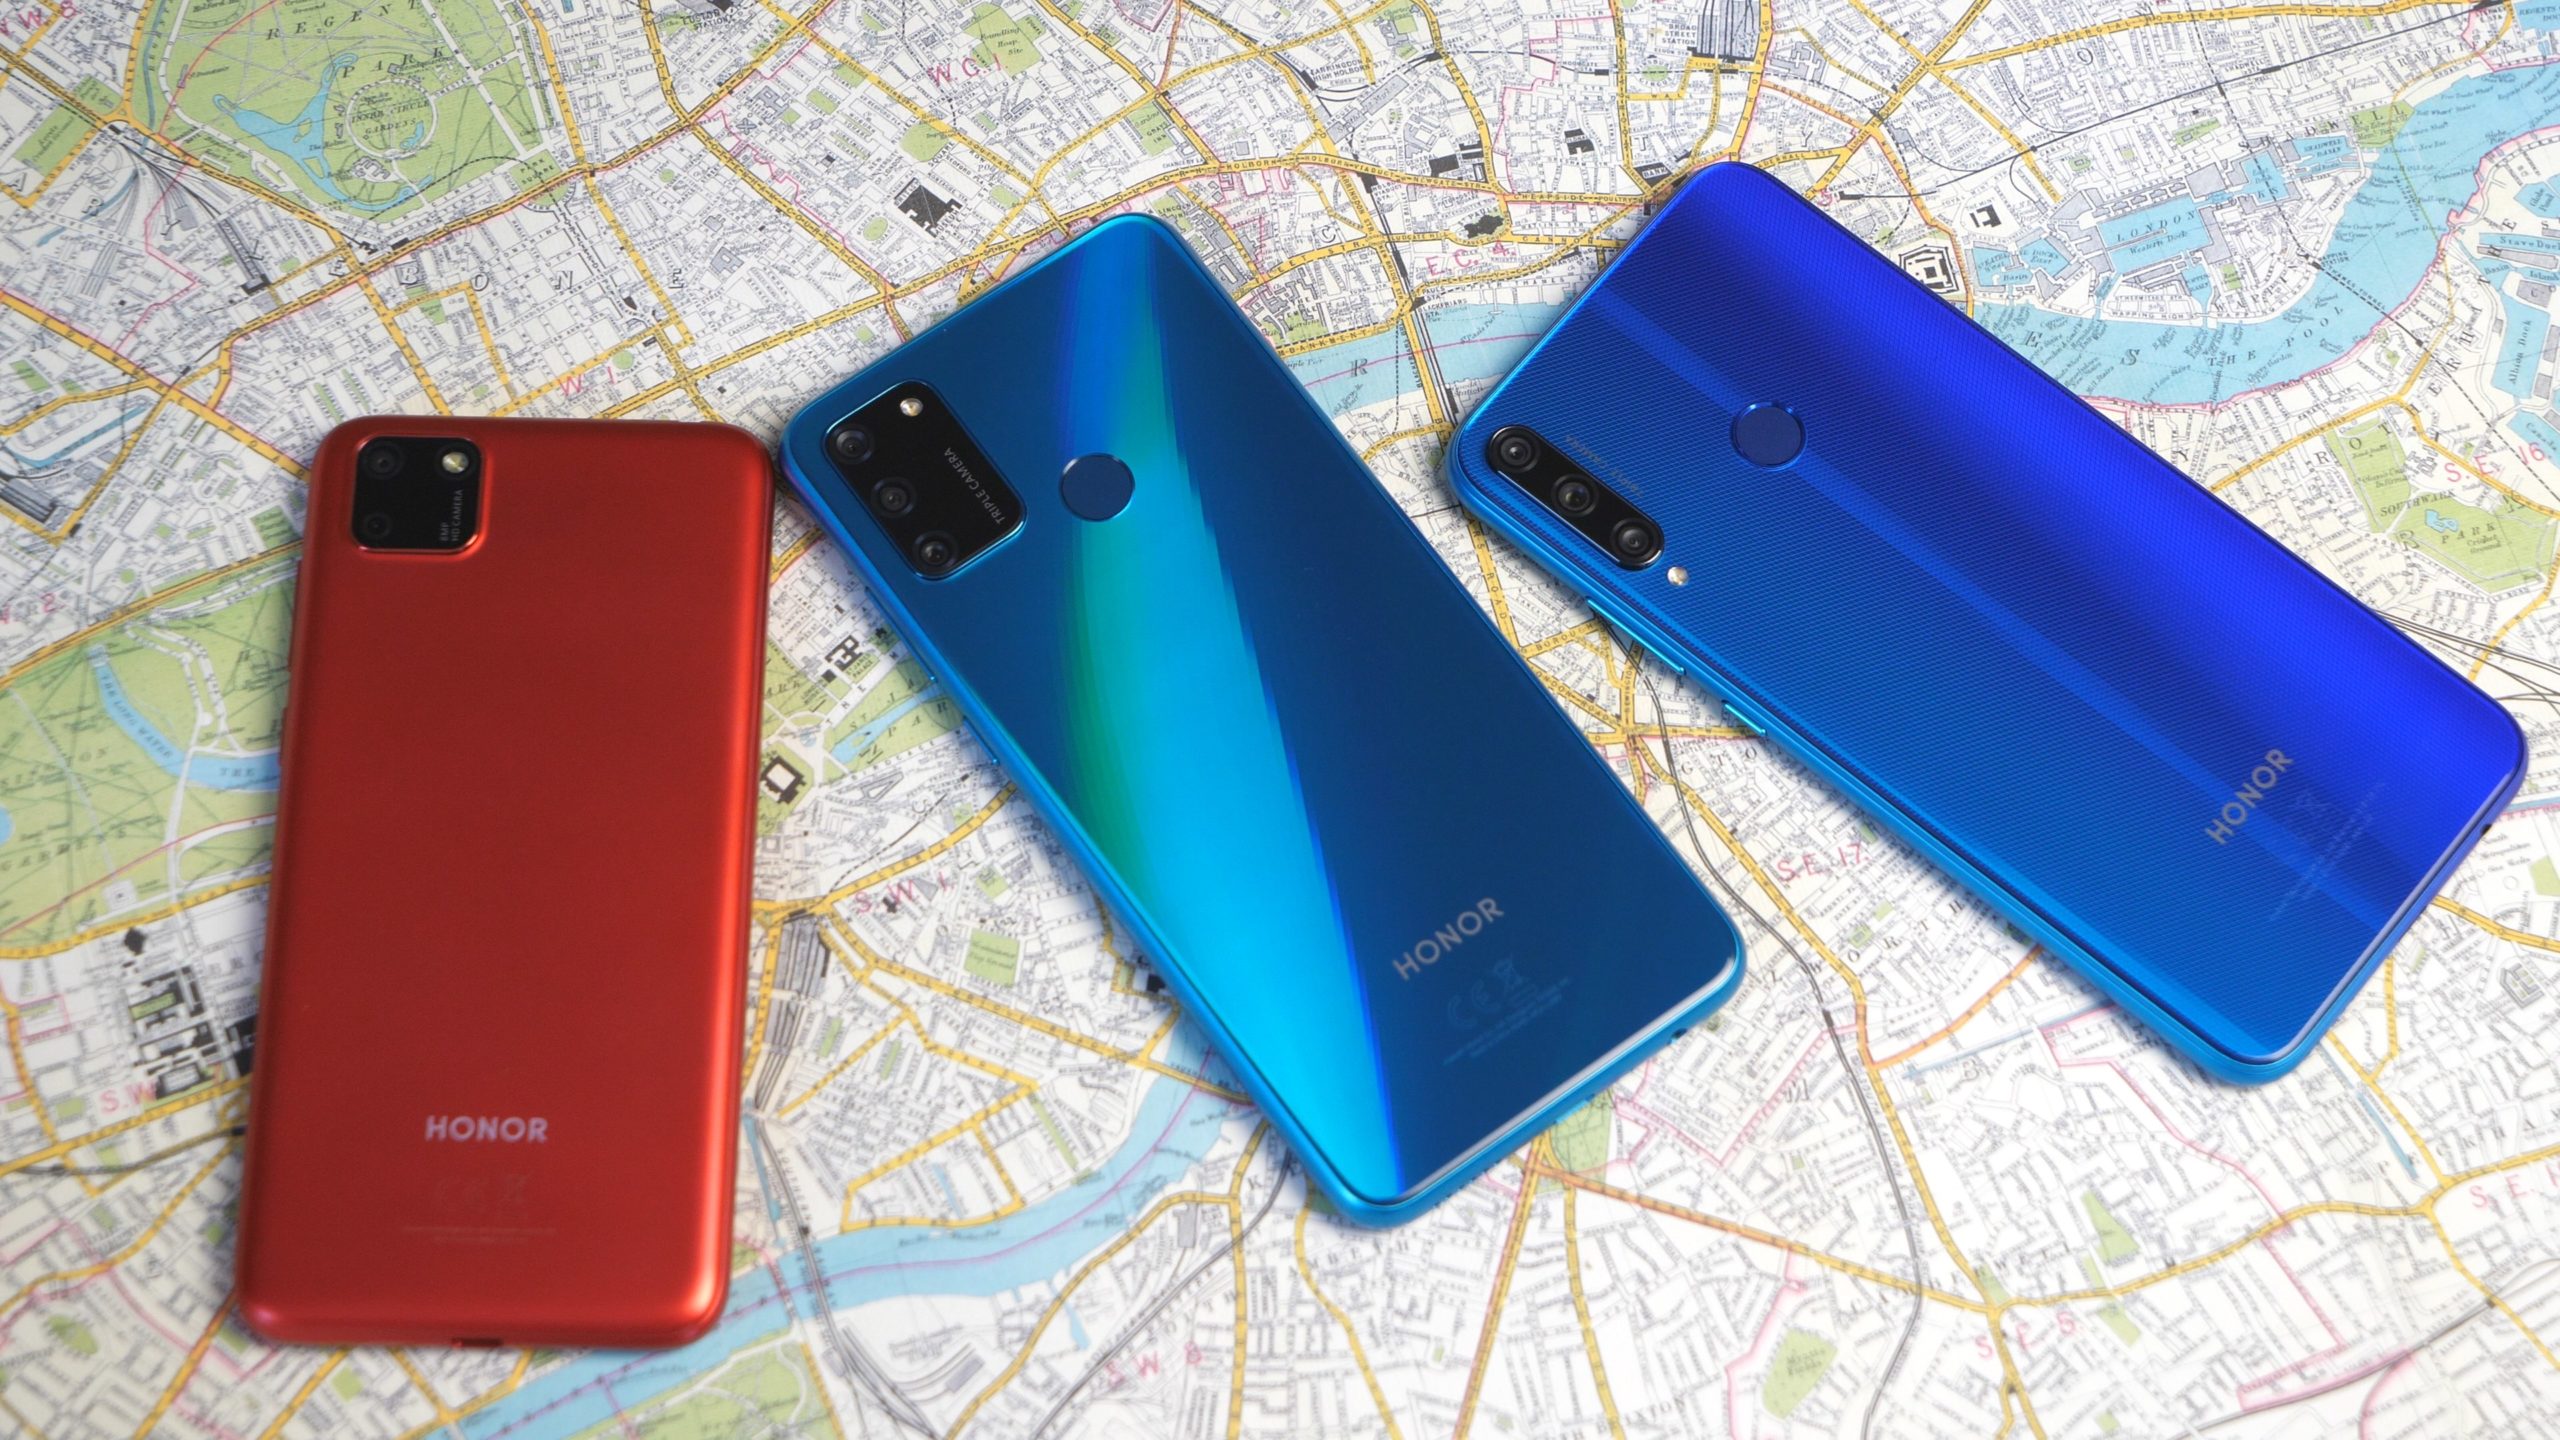 Review of smartphones Honor 9A, 9C and 9S